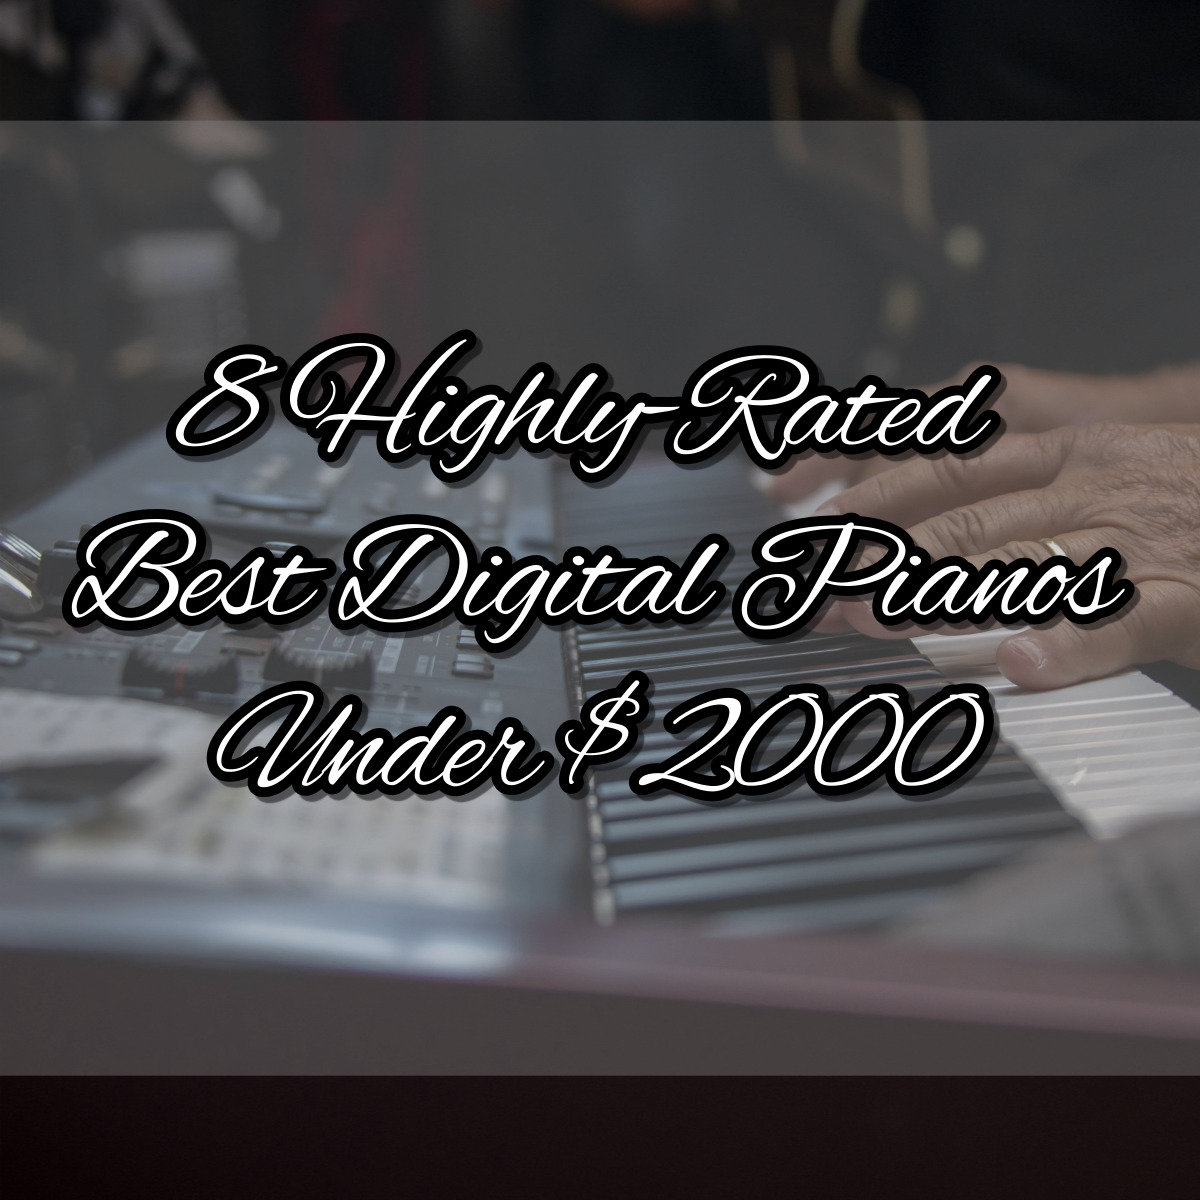 8 Highly-Rated Best Digital Pianos Under $2000